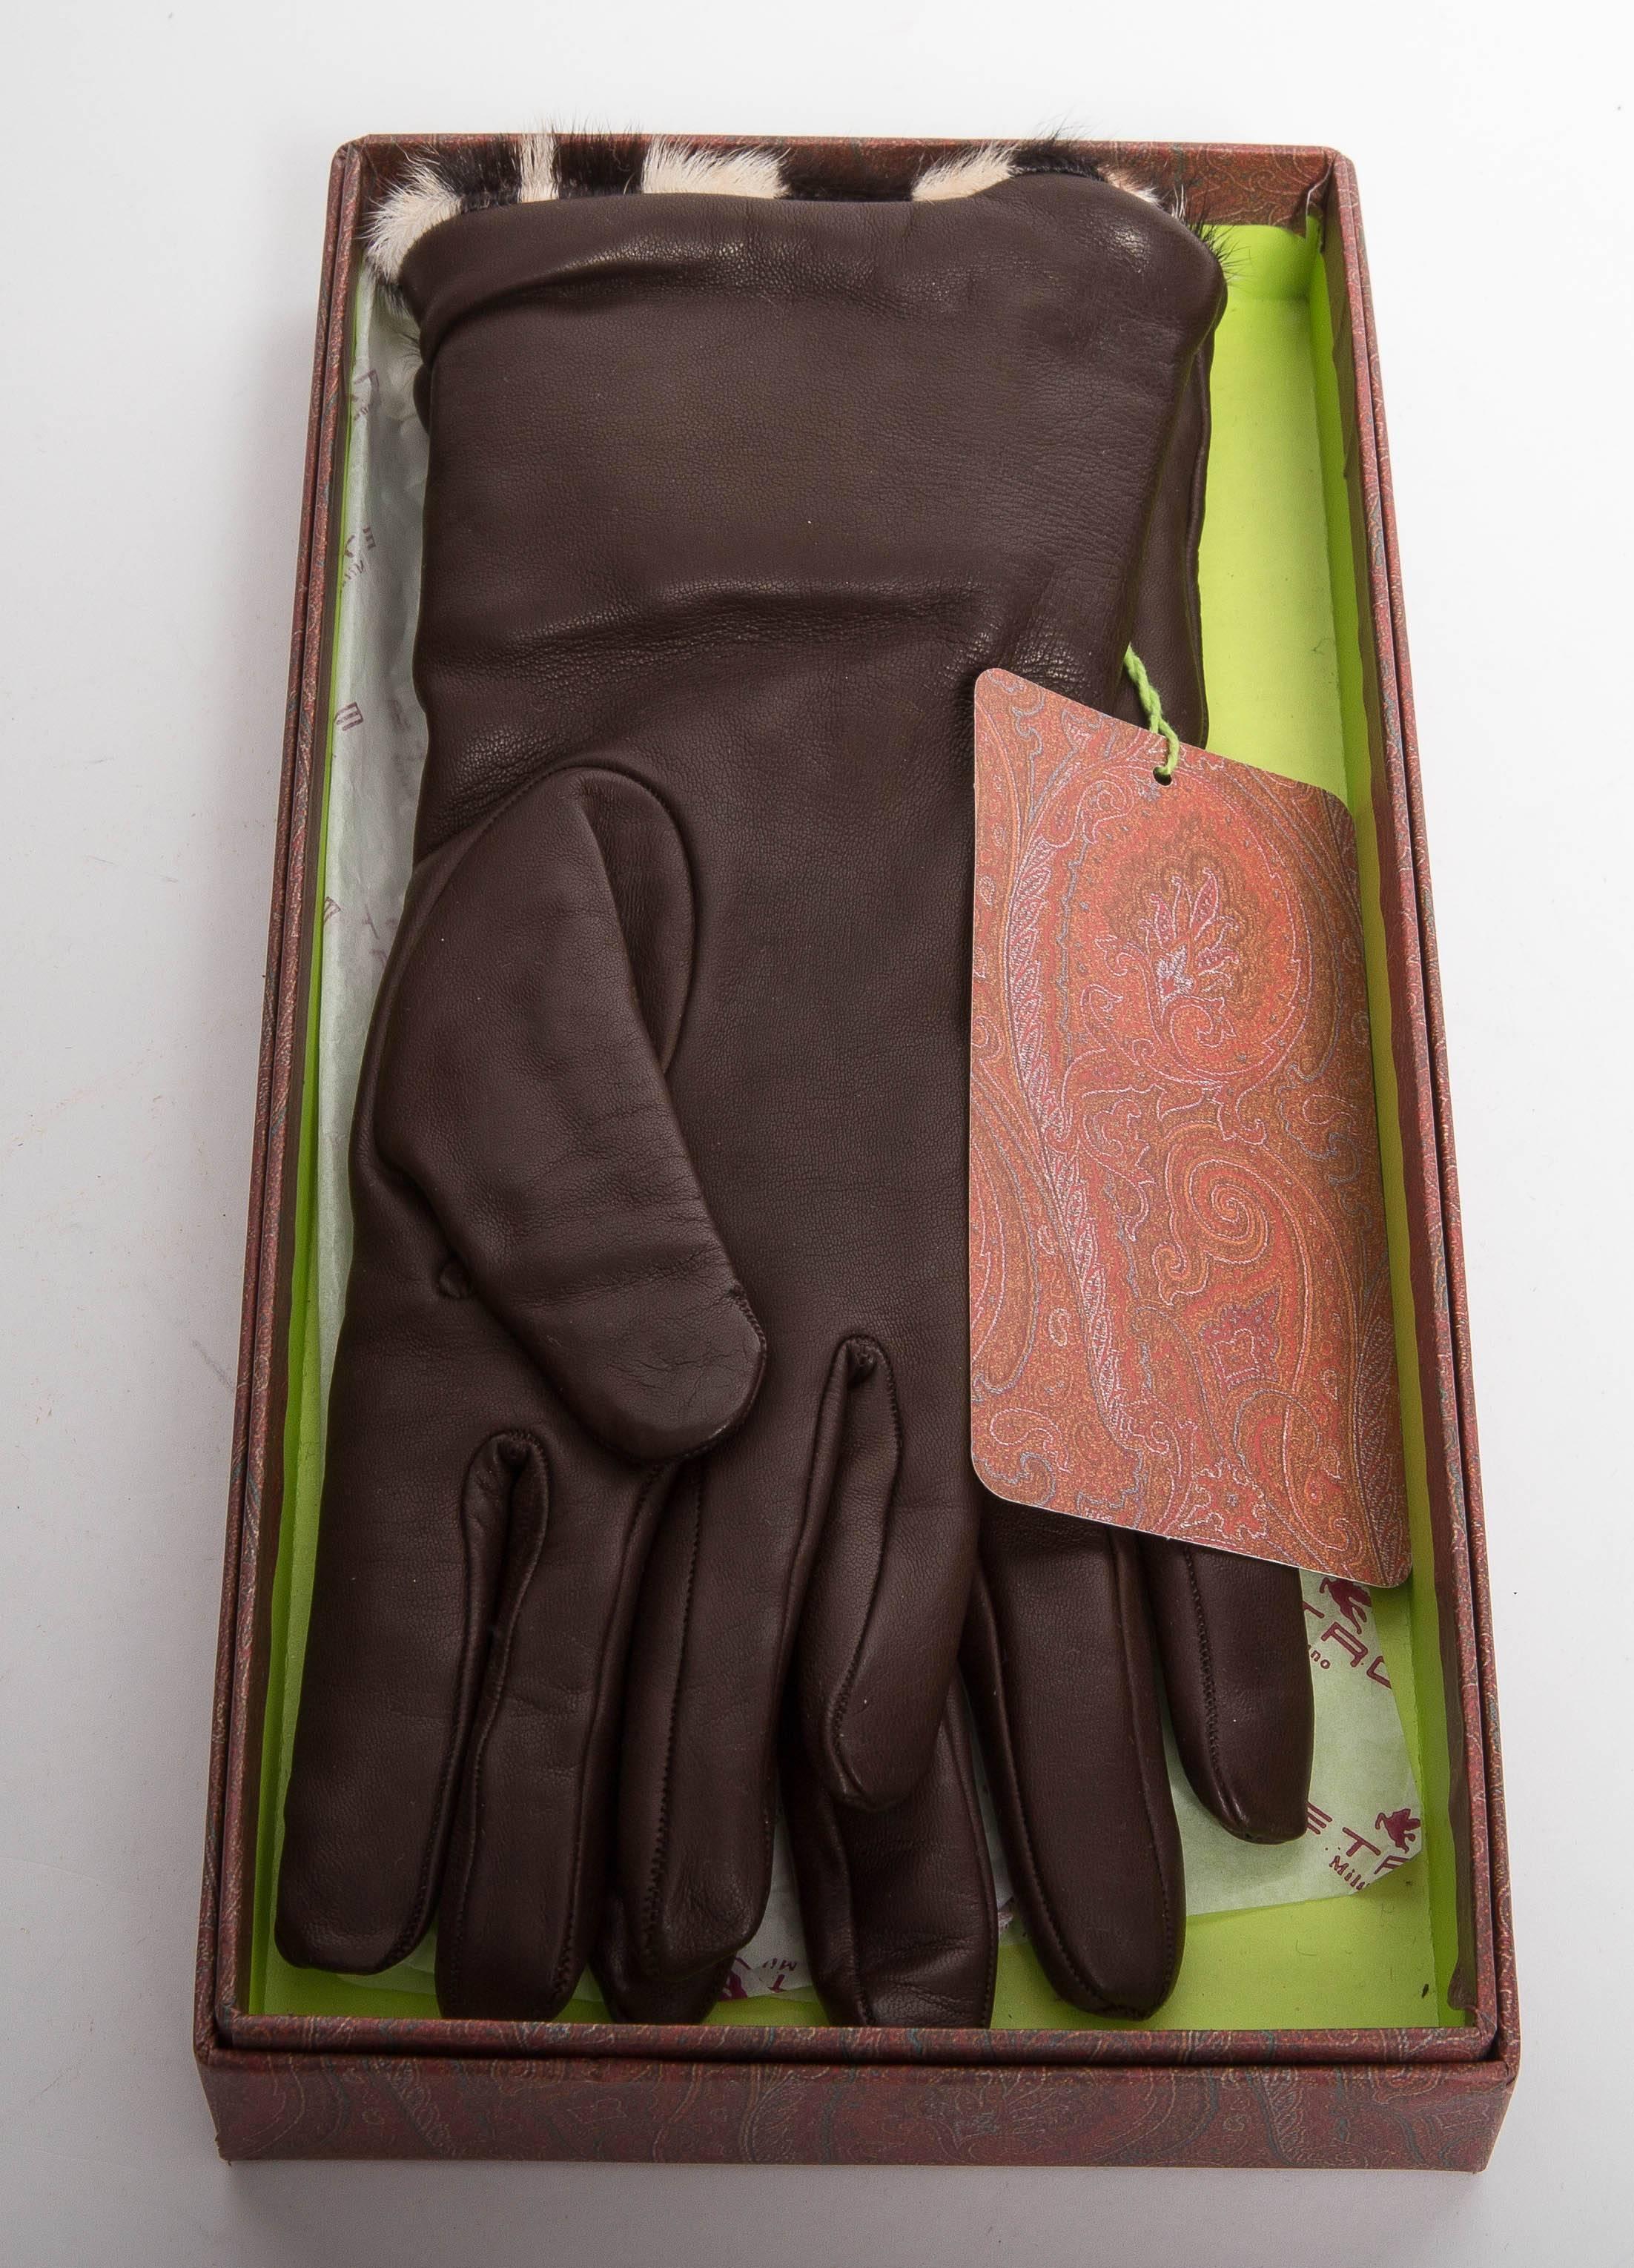 Very Elegant Size 6 Etro Lambskin Gloves Lined in Rabbit Fur. These gloves are long enough to cover the wrist with ease and feature a snap closure with leather tab  at the top of the glove. The fur subtly  peeks above the top of the glove.